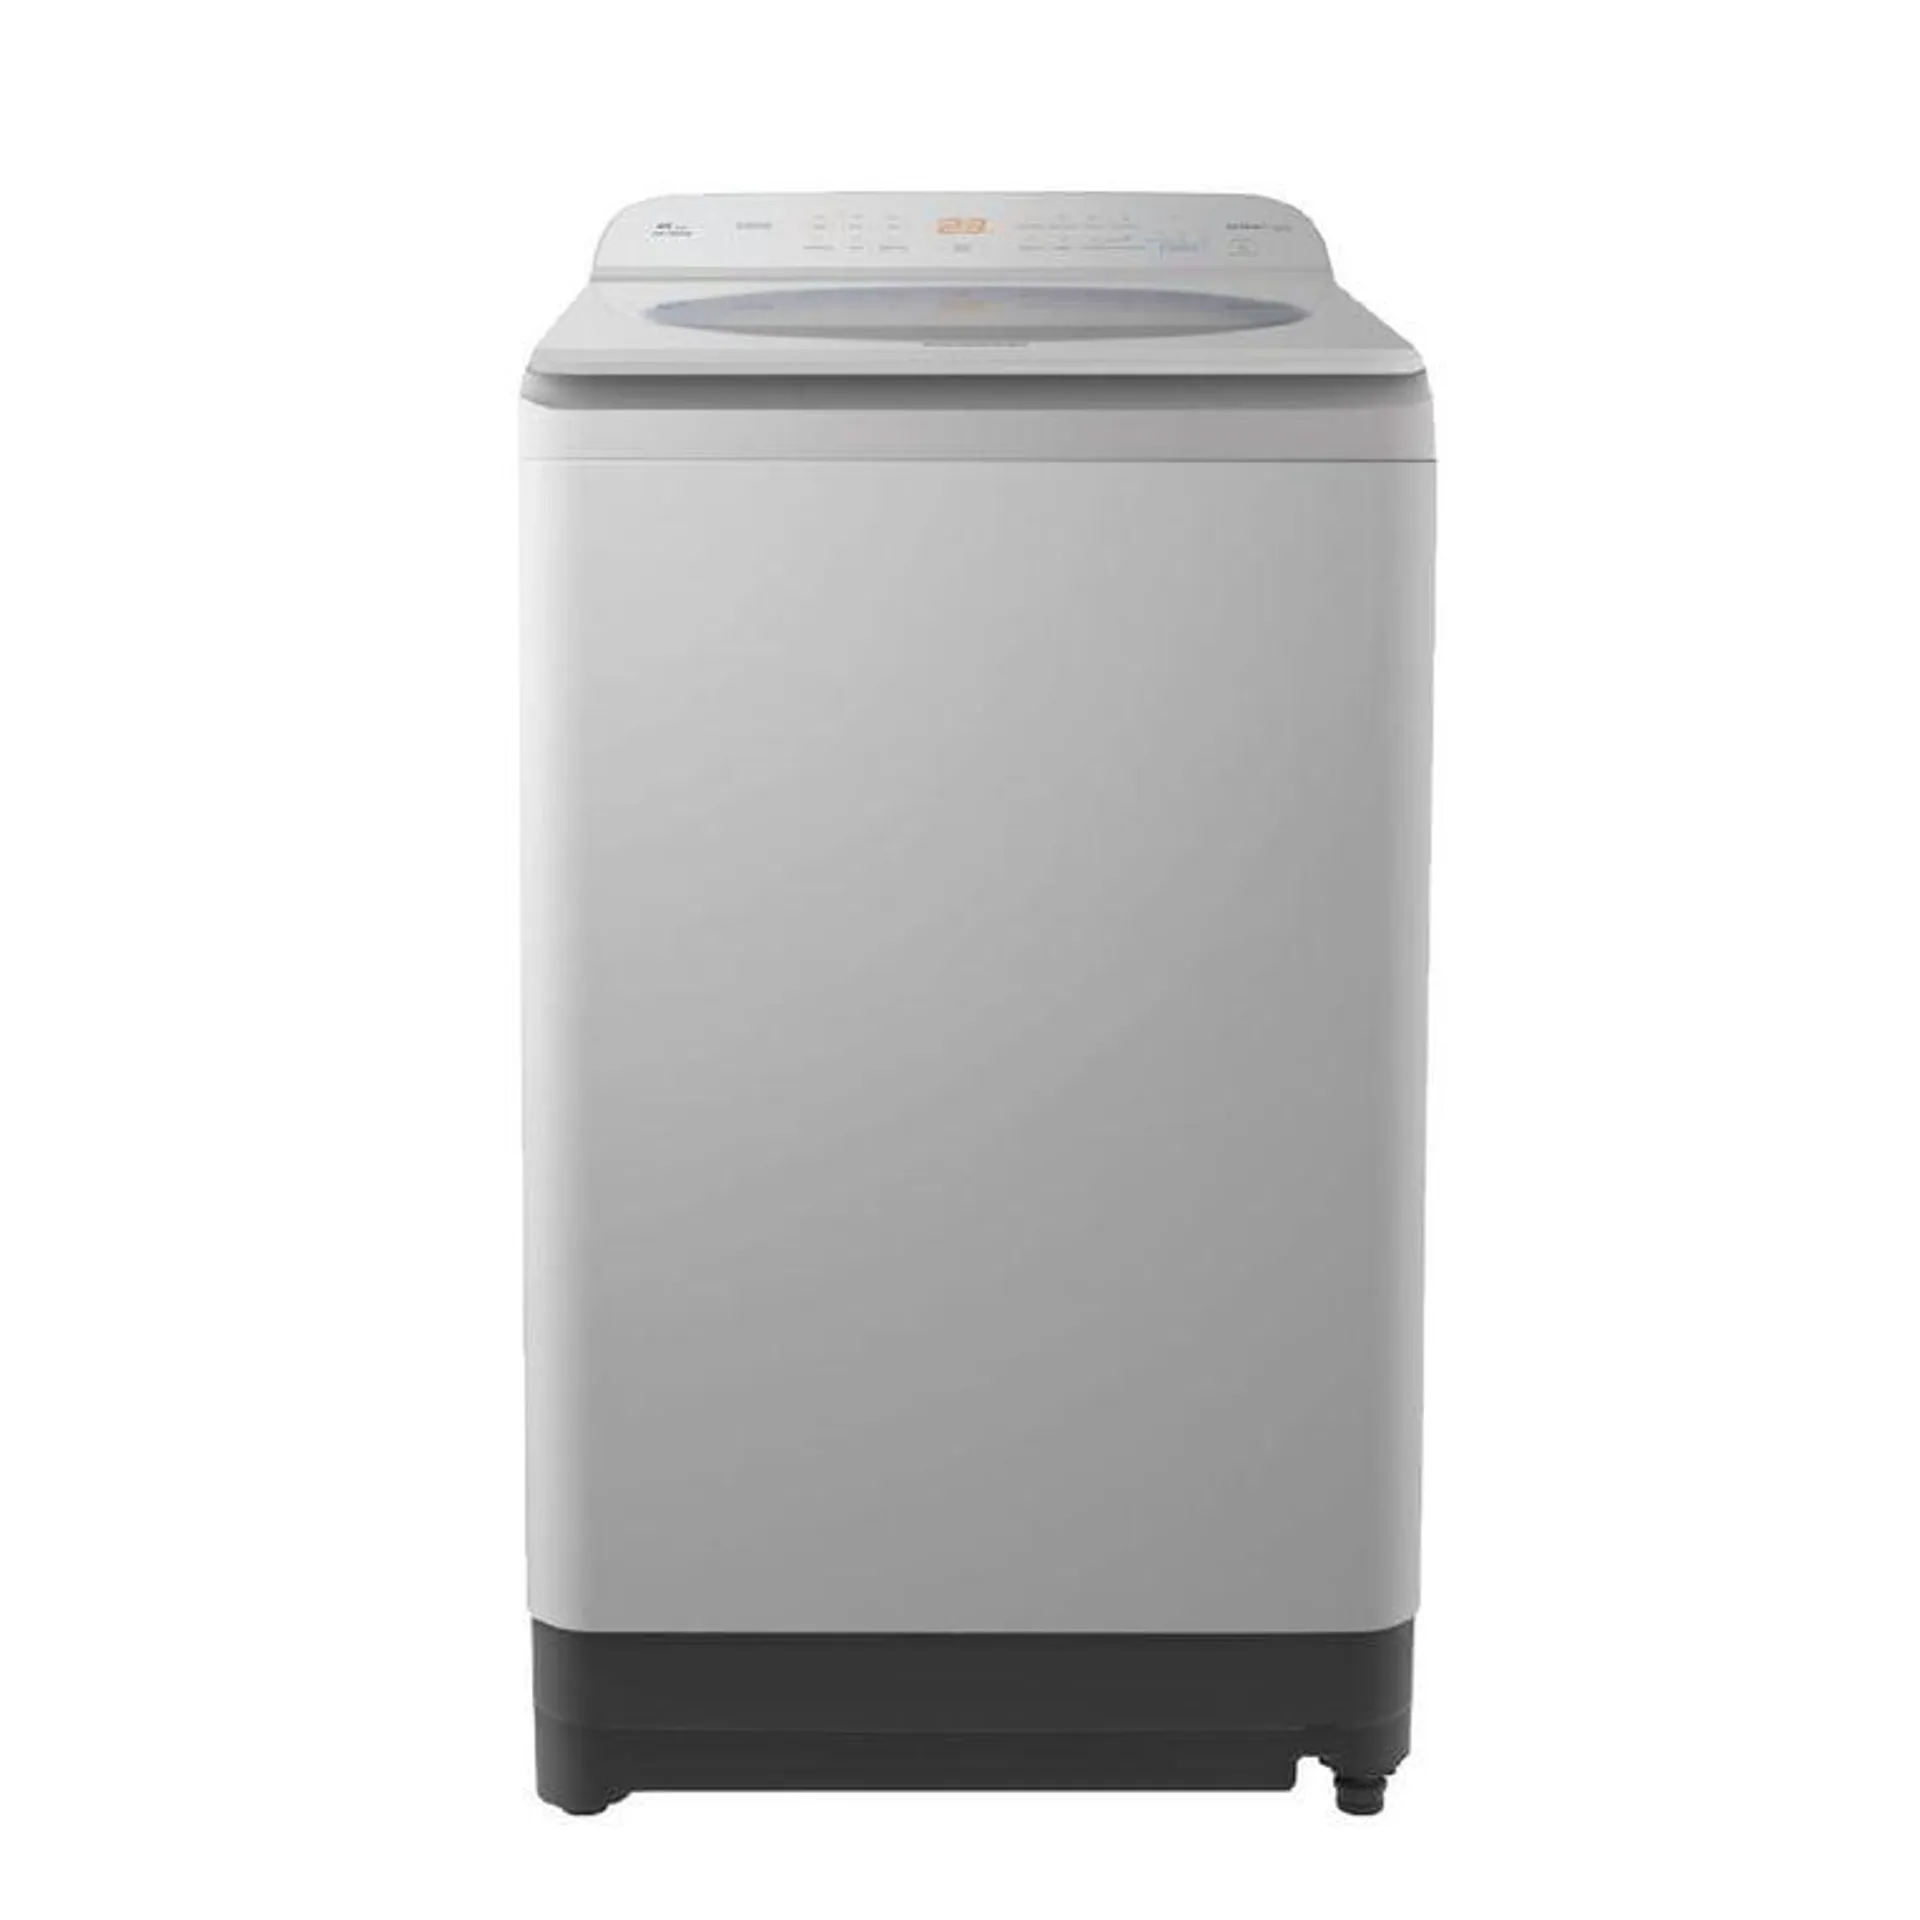 Panasonic 6kg Top Load Washer with StainMaster